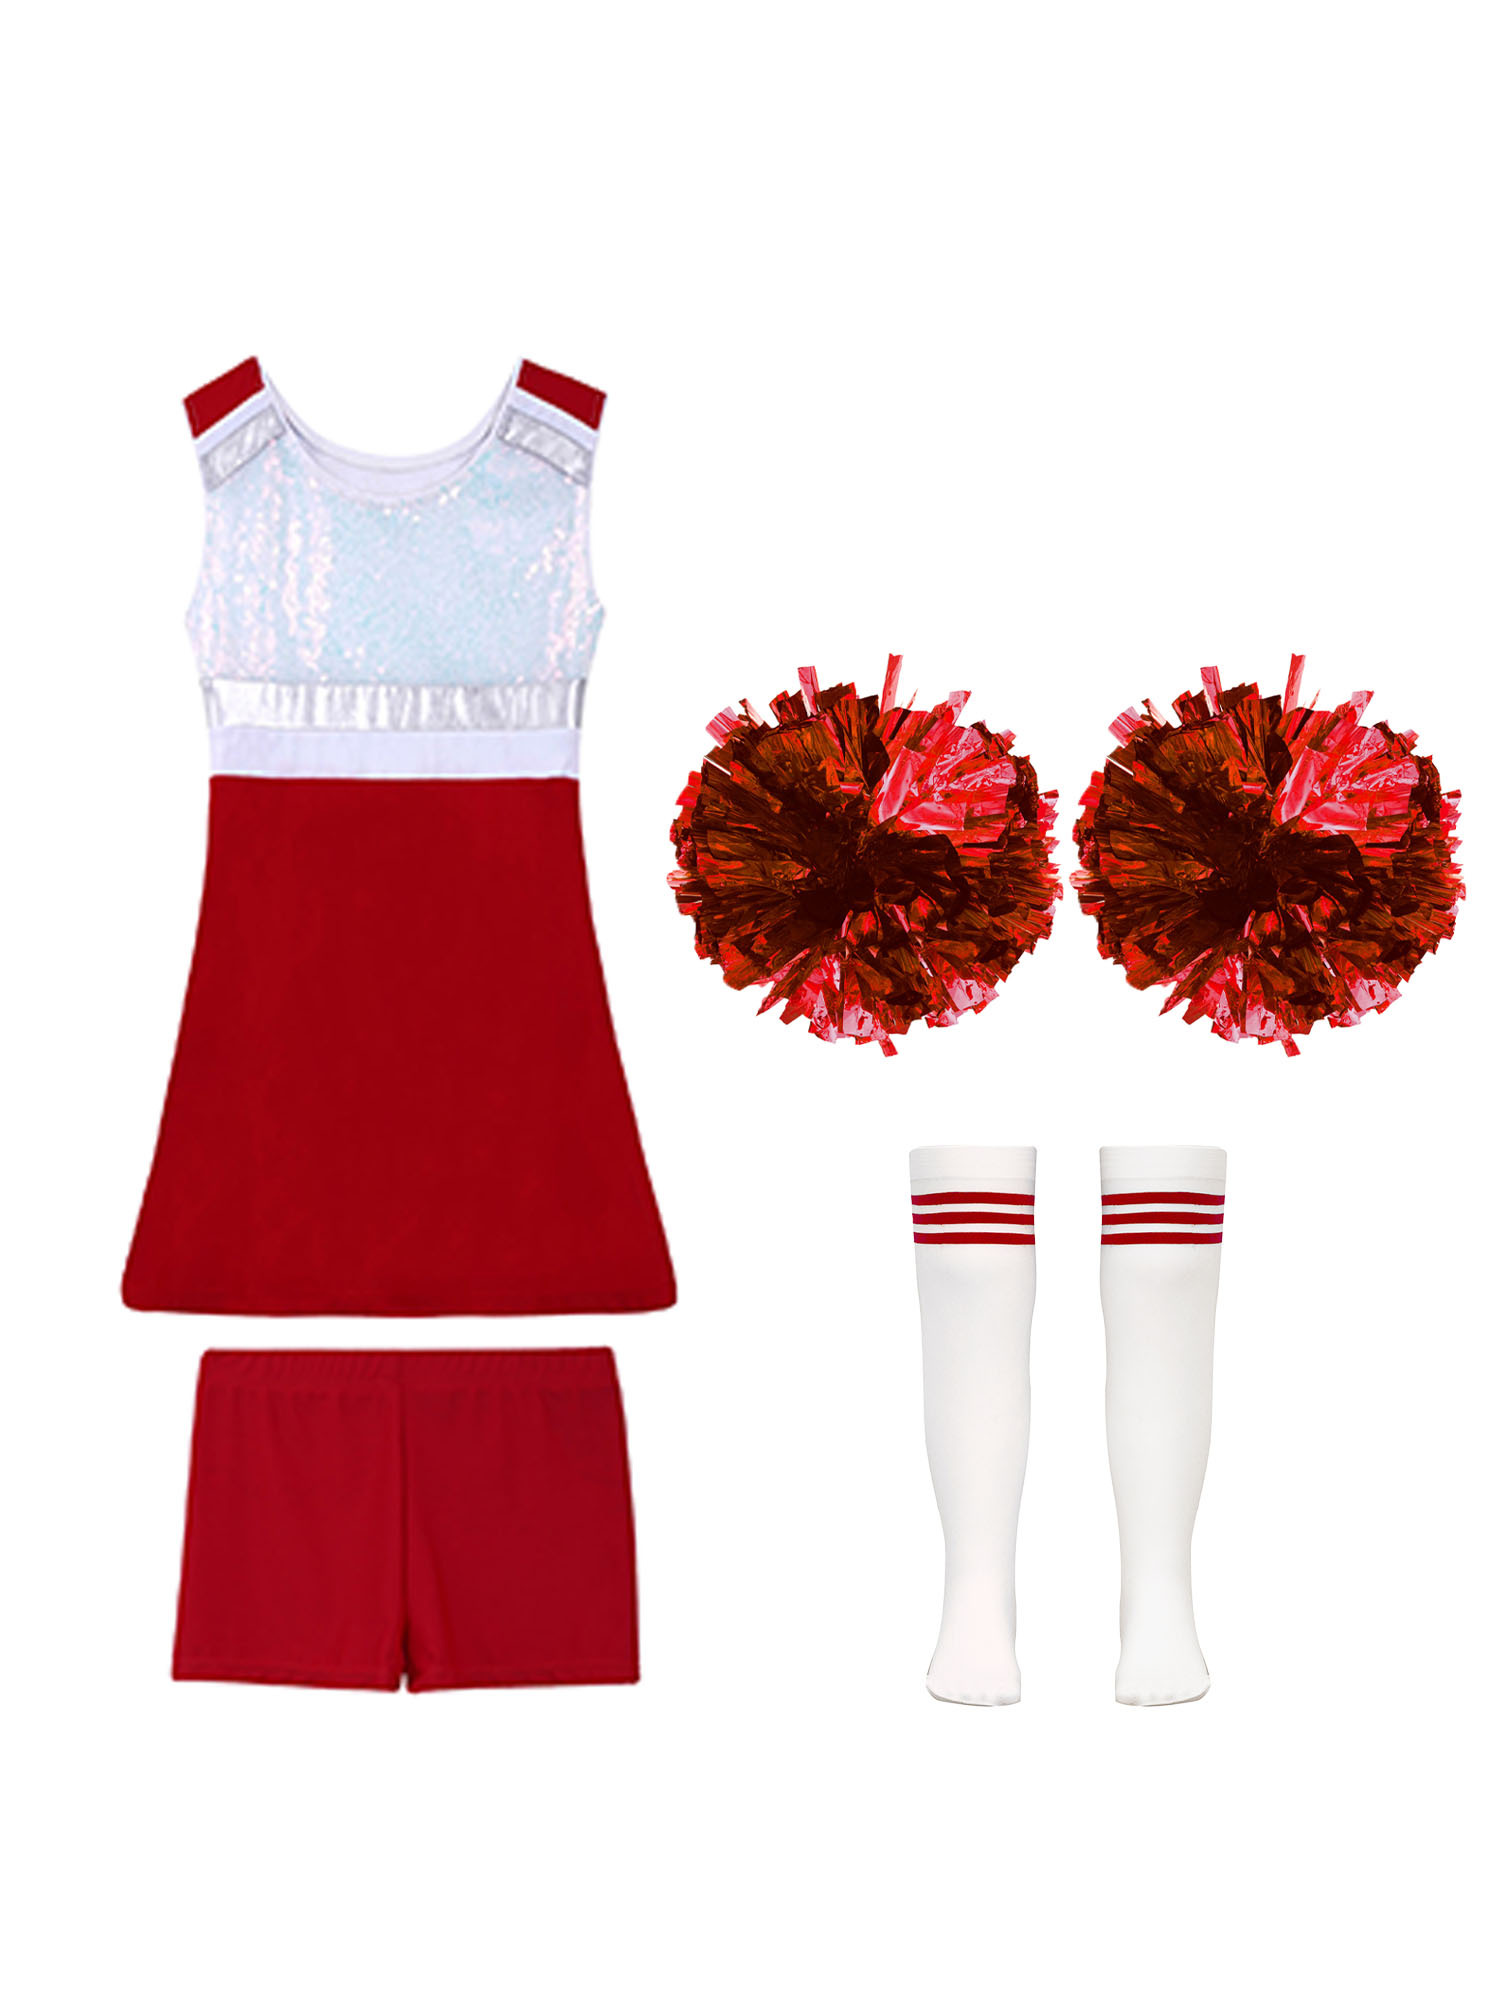 TiaoBug Kids Girls Cheer Leader Uniform Sports Games Cheerleading Dance Outfits Halloween Carnival Fancy Dress Up A Red-A 14 - image 4 of 5